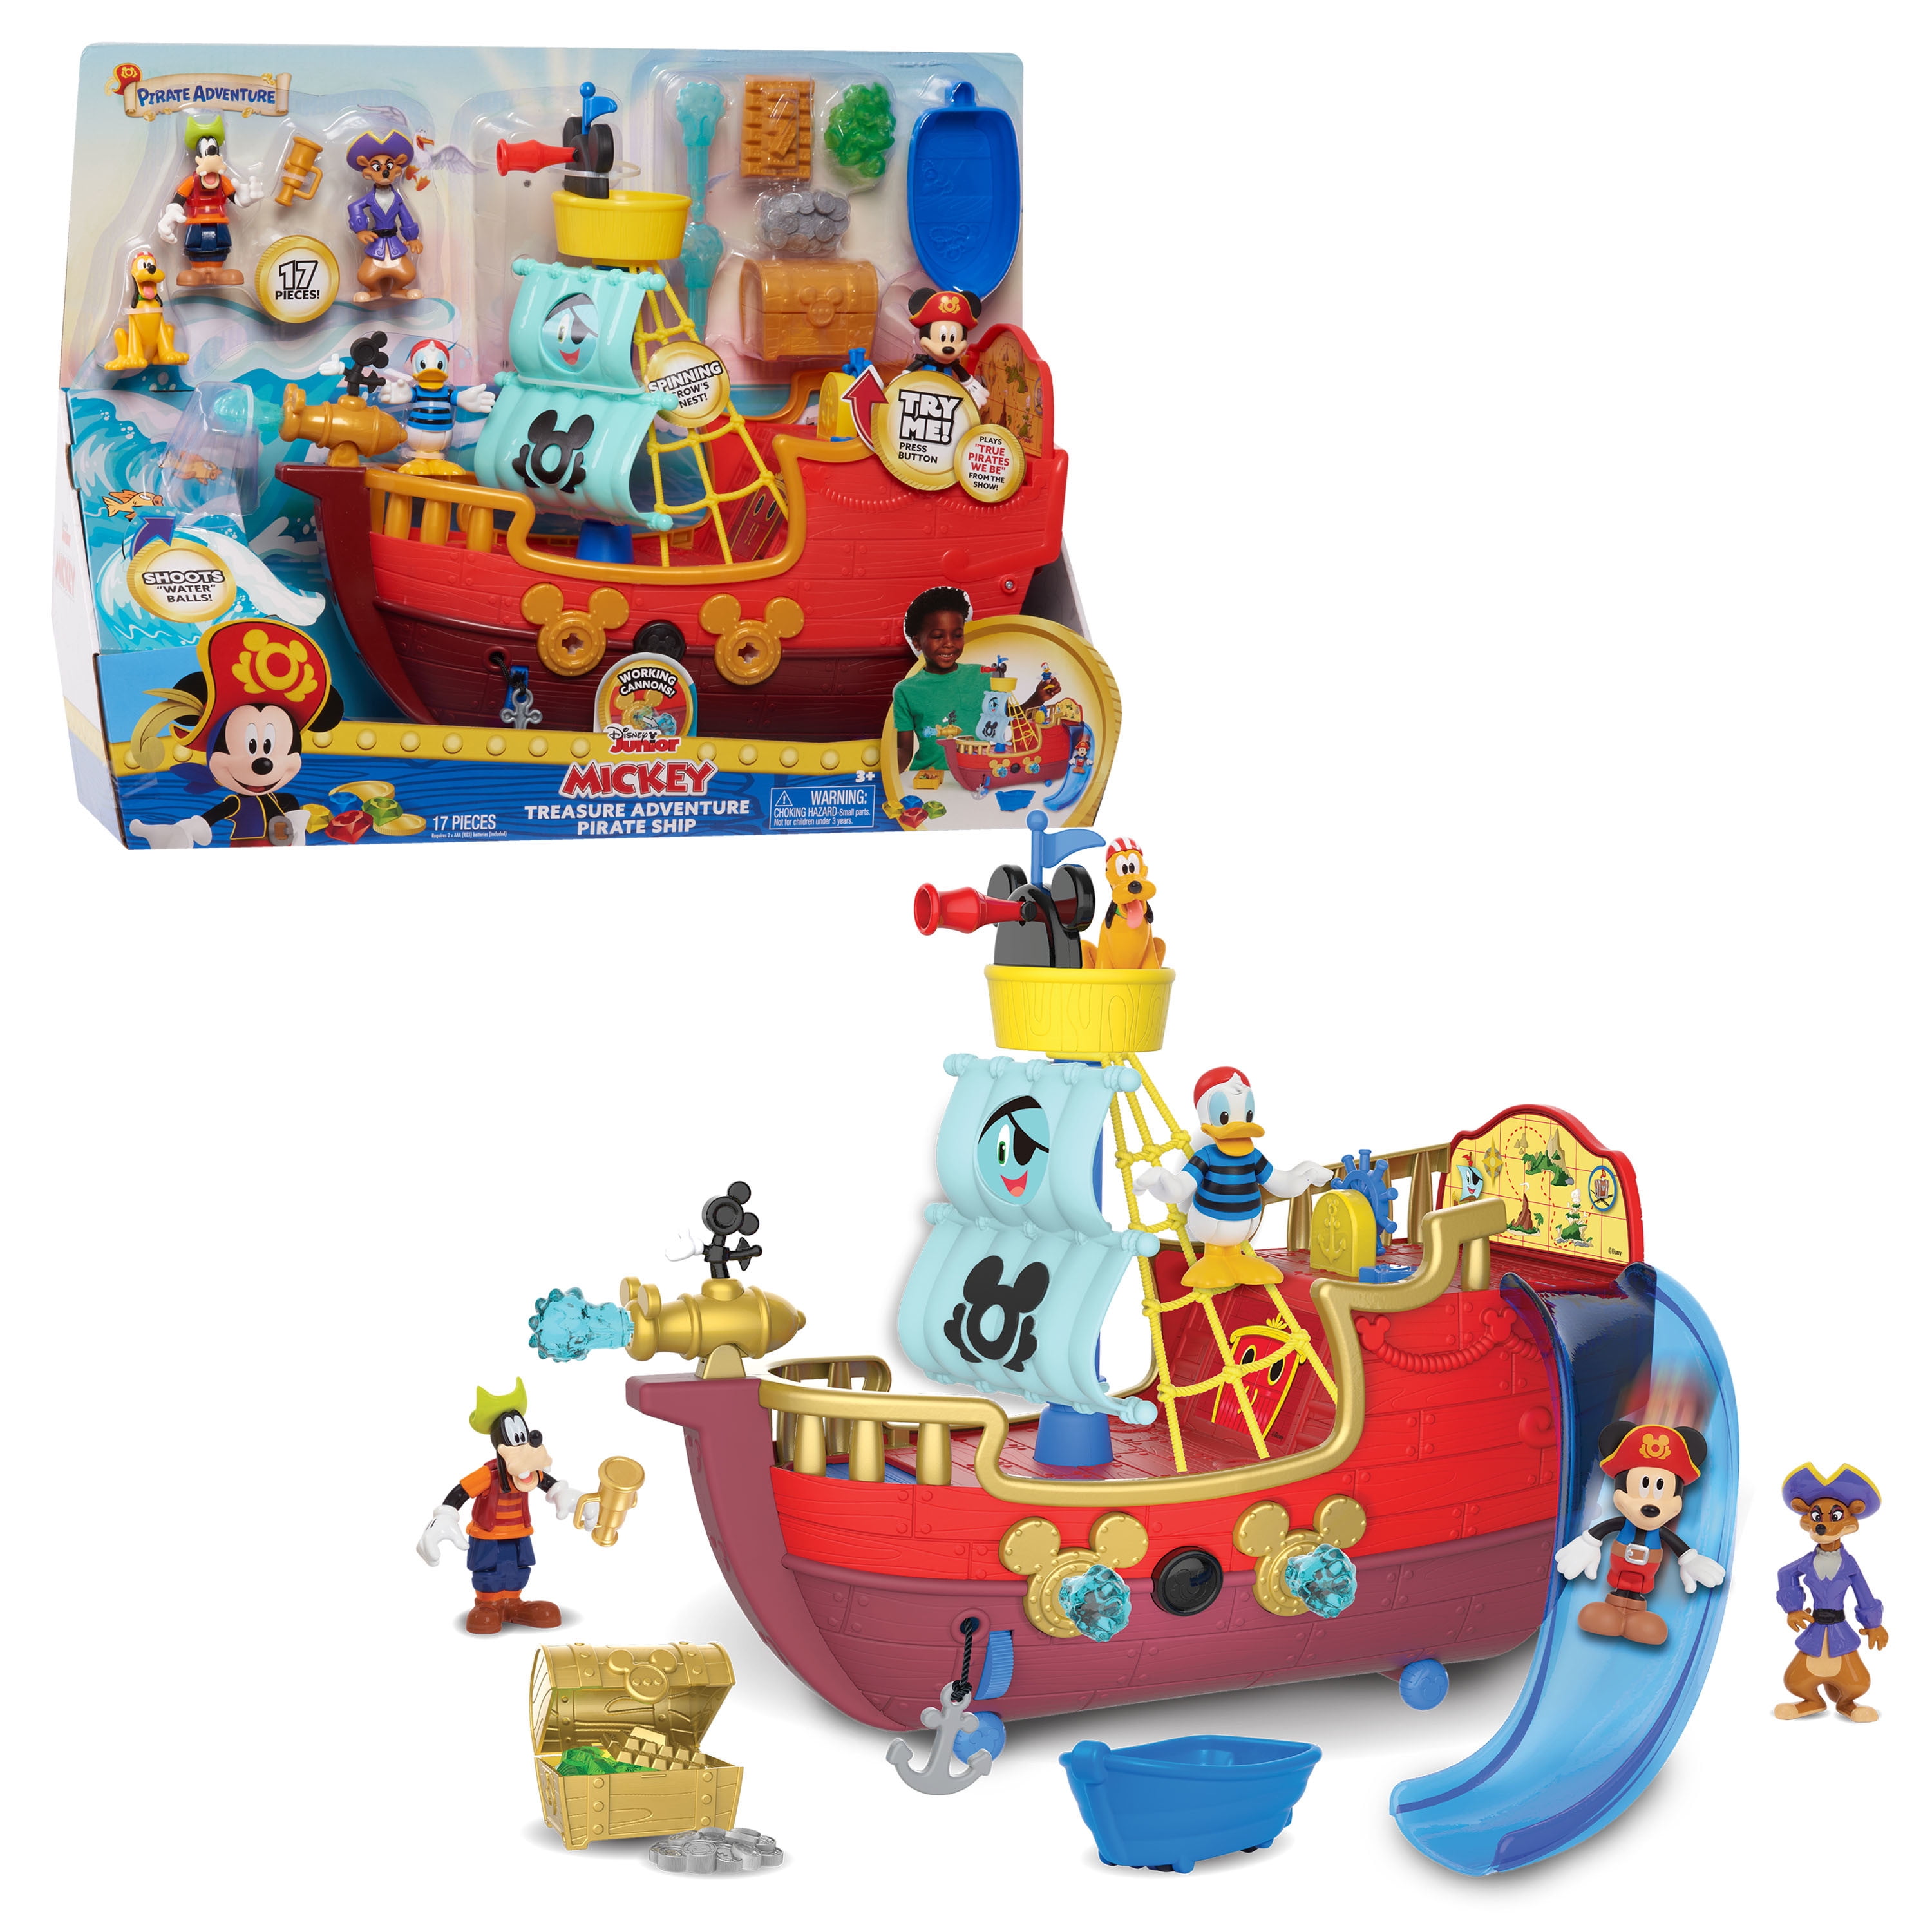 Disney Junior Mickey Mouse Funhouse Treasure Adventure Pirate Ship Playset with Sounds and Figures, Officially Licensed Kids Toys for Ages 3 Up, Gifts and Presents